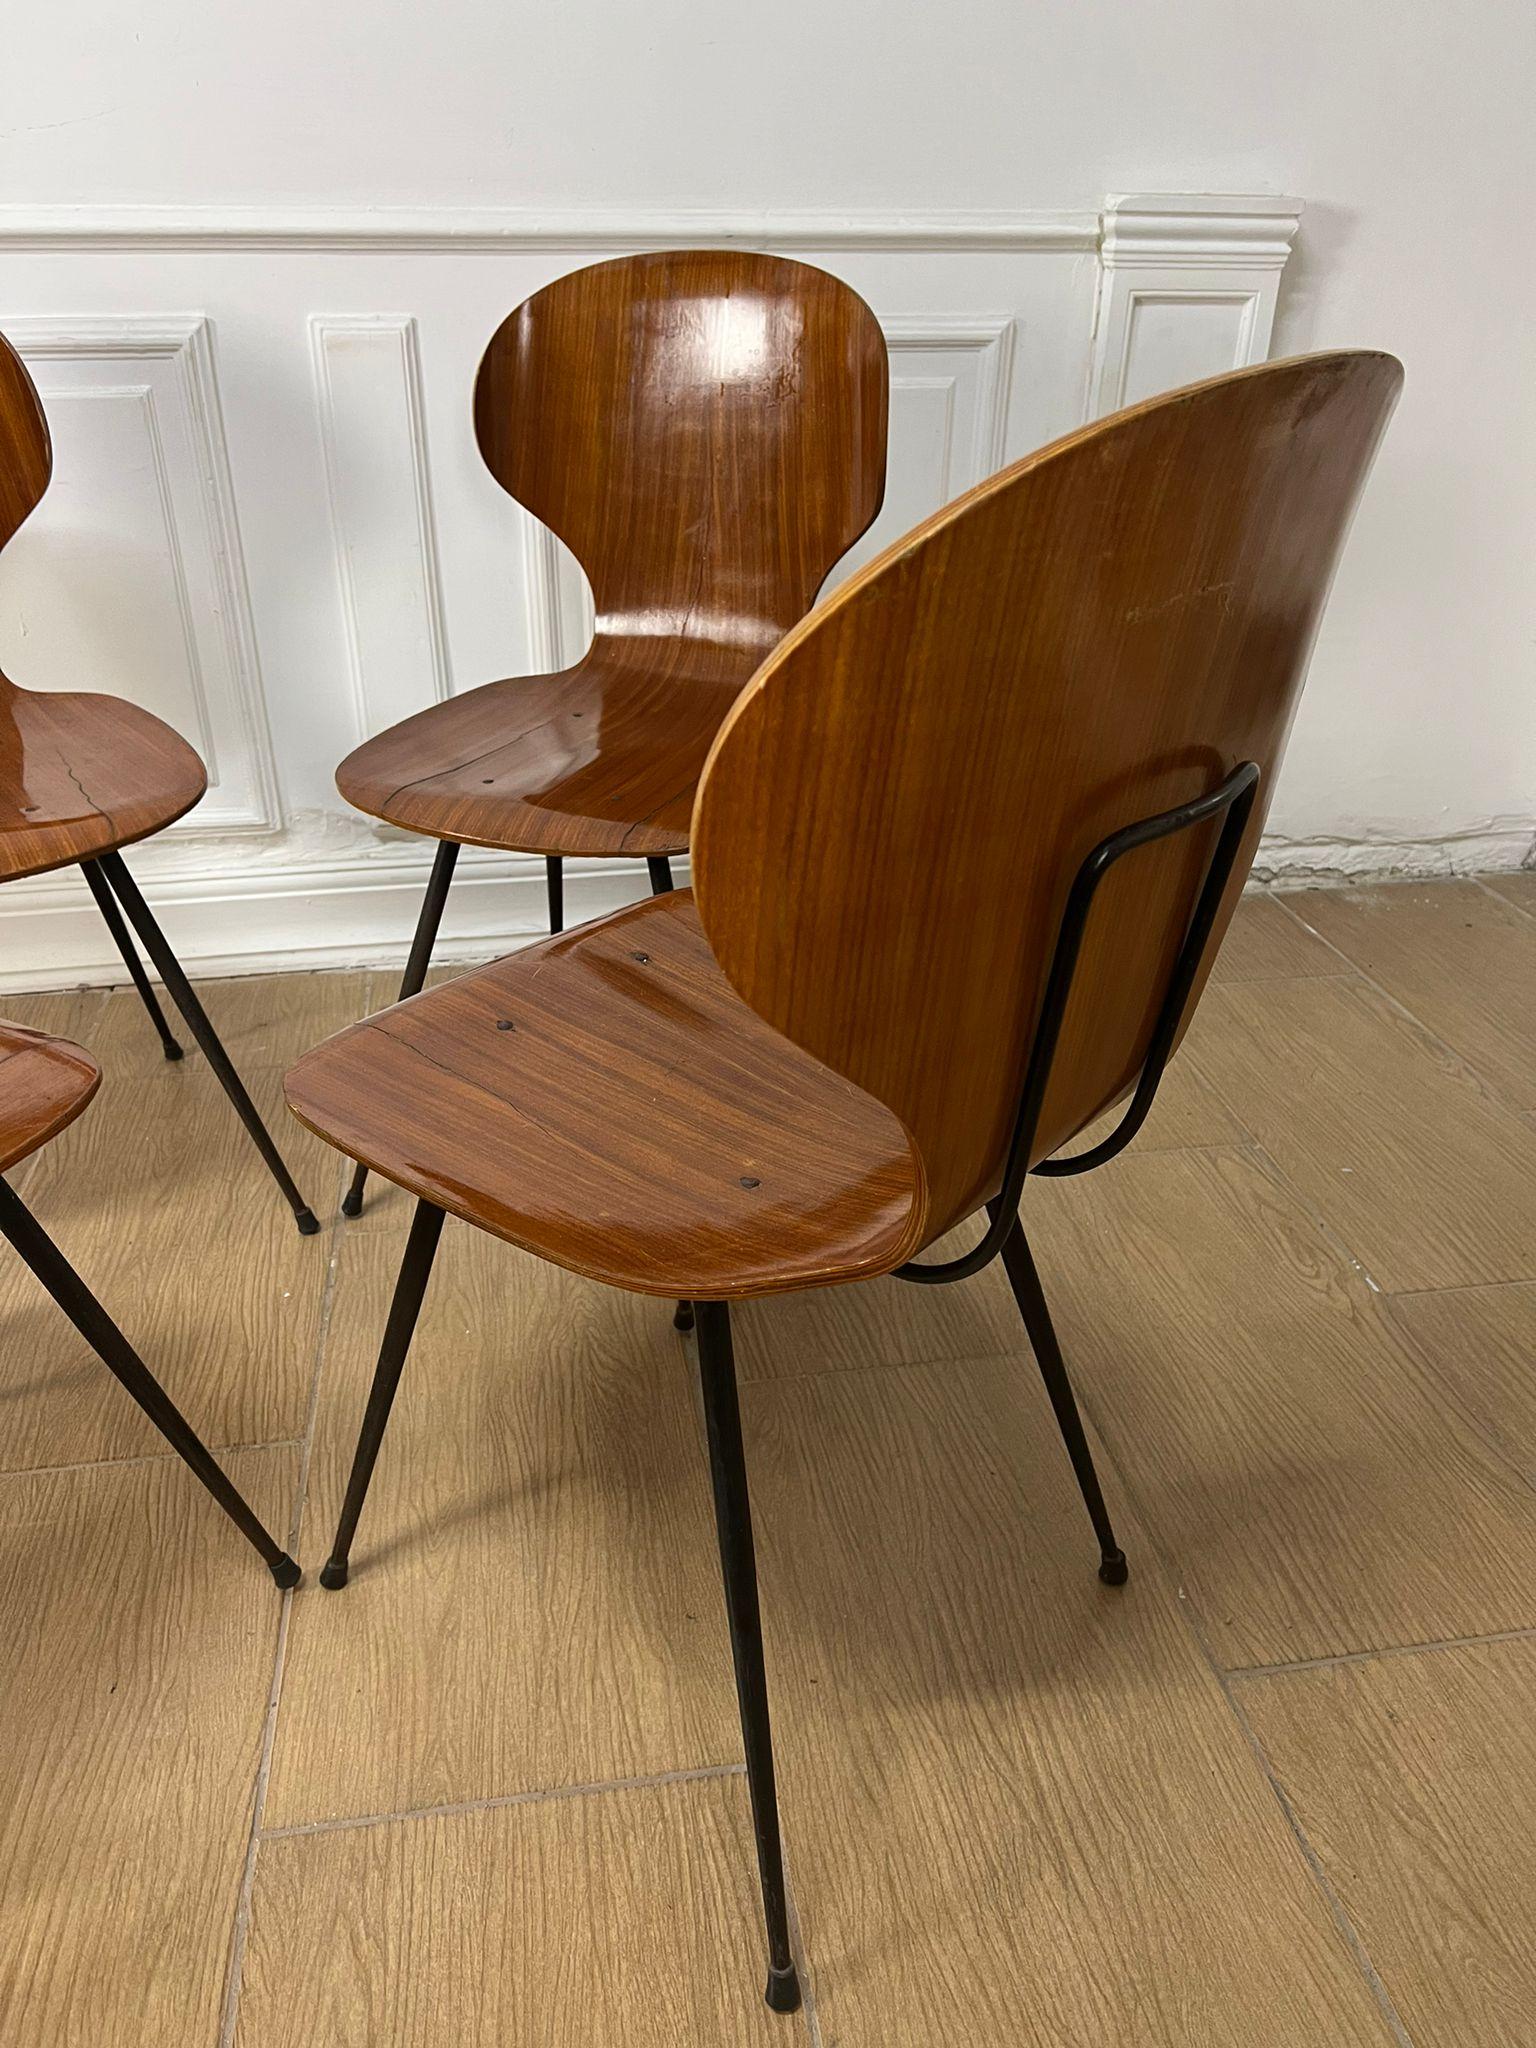 Mid-20th Century Set of Four Chairs by Carlo Ratti